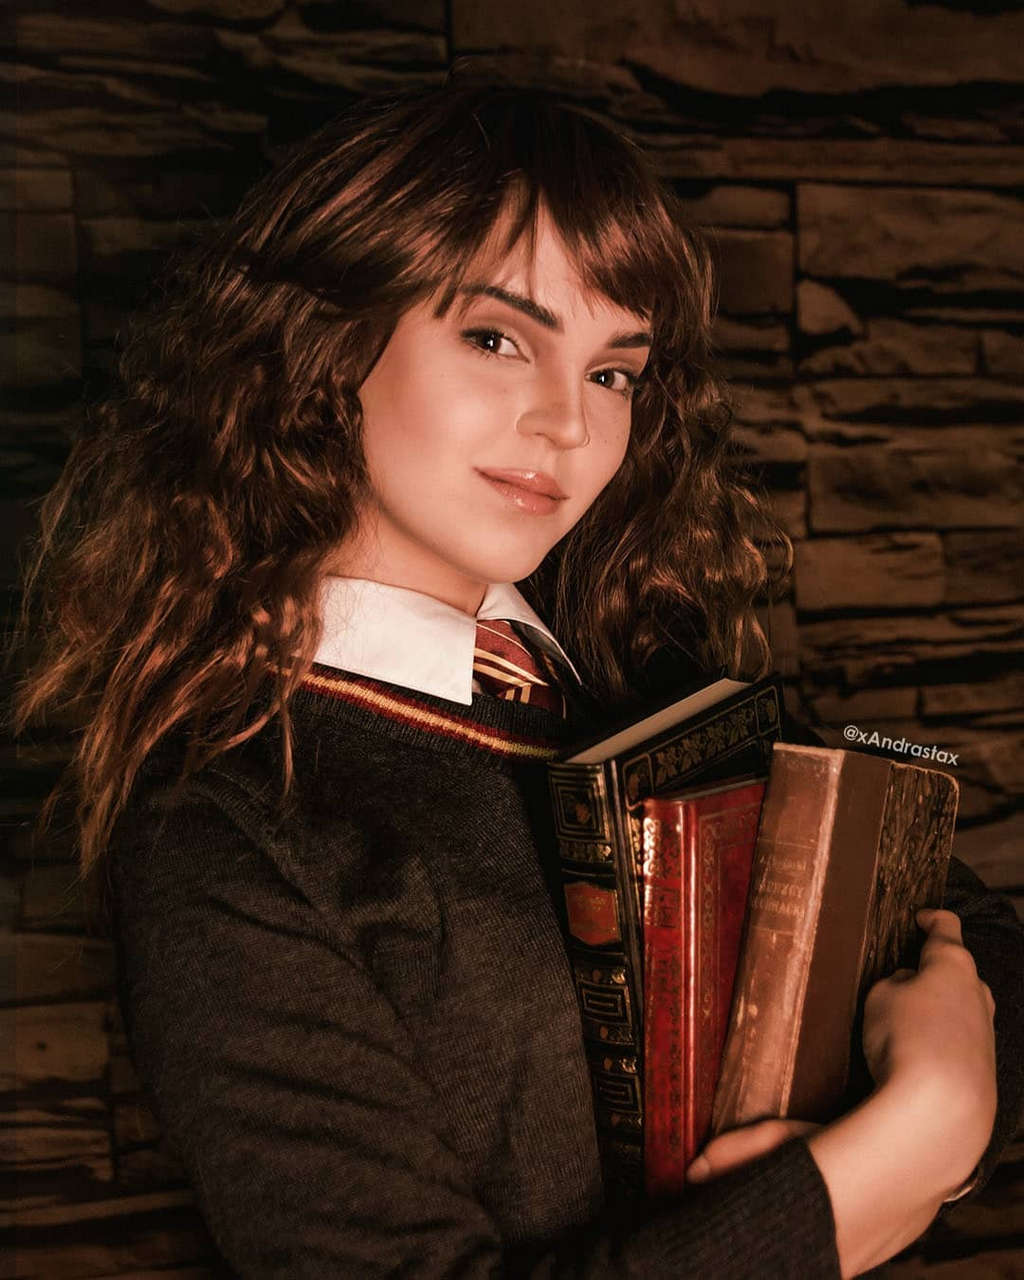 Harry Potter Hermione Granger Cosplay By Officialandrast